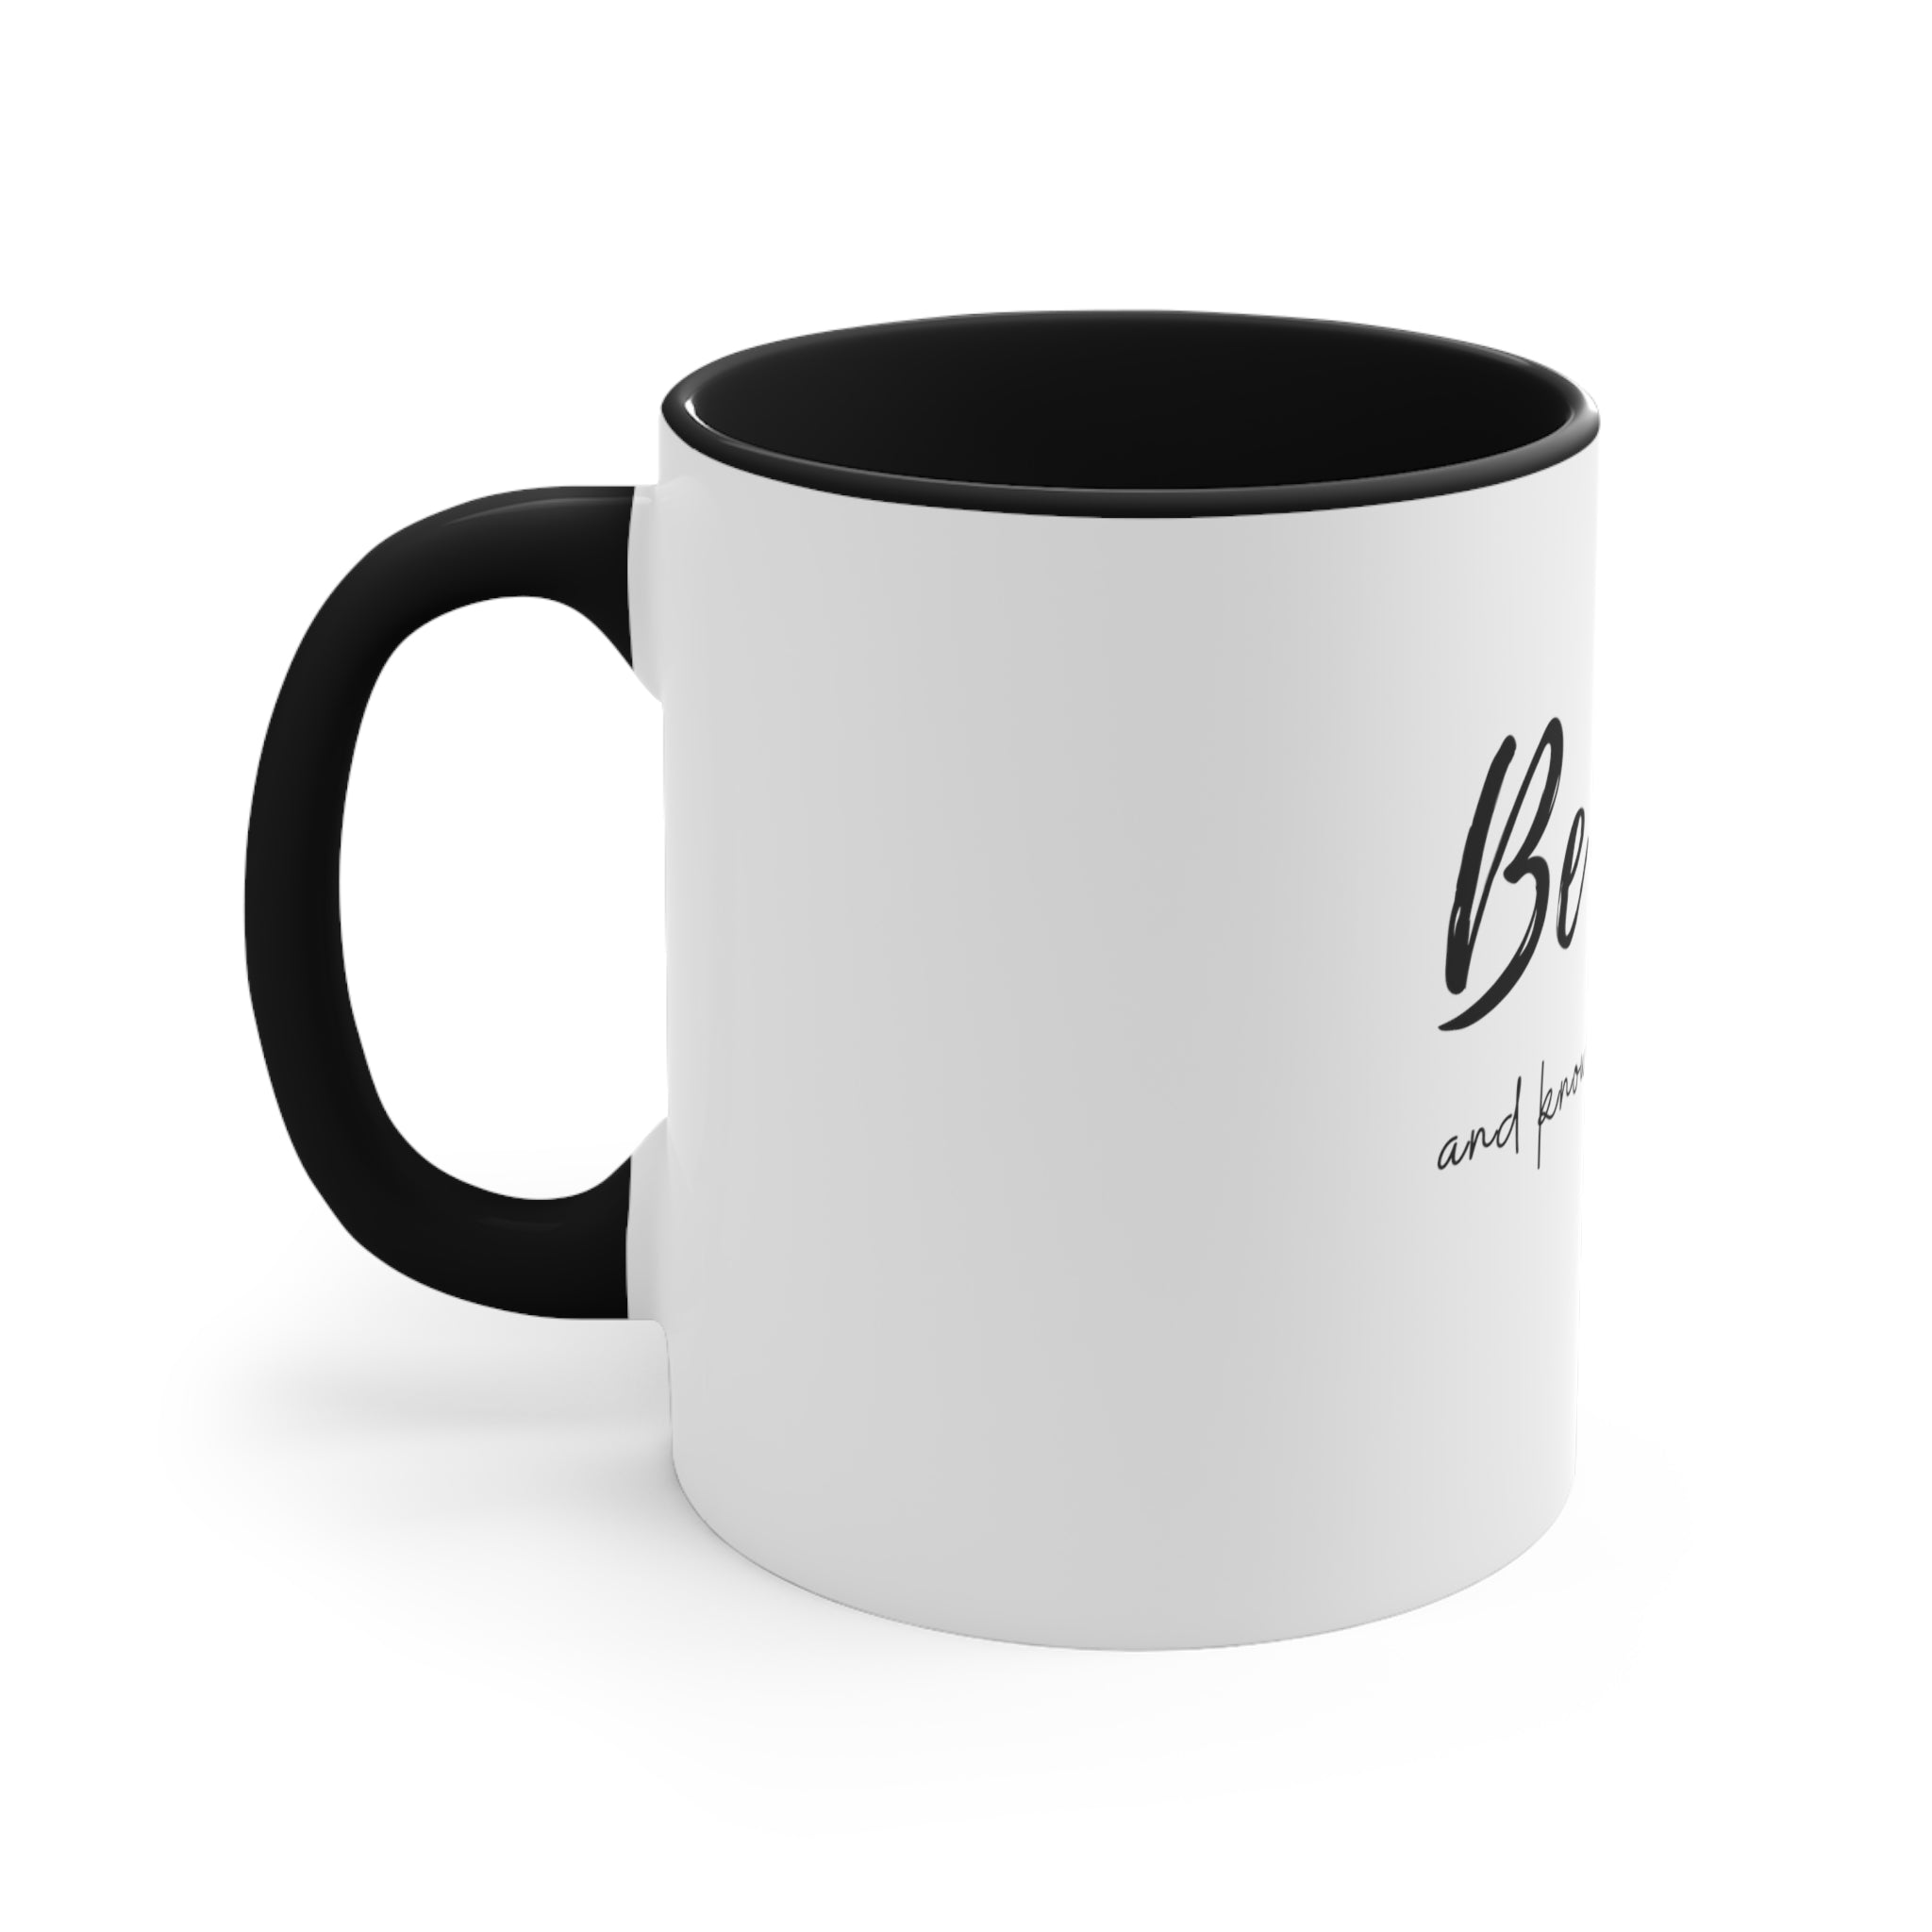 Be Still And Know That I am God Accent Coffee Mug, 11oz